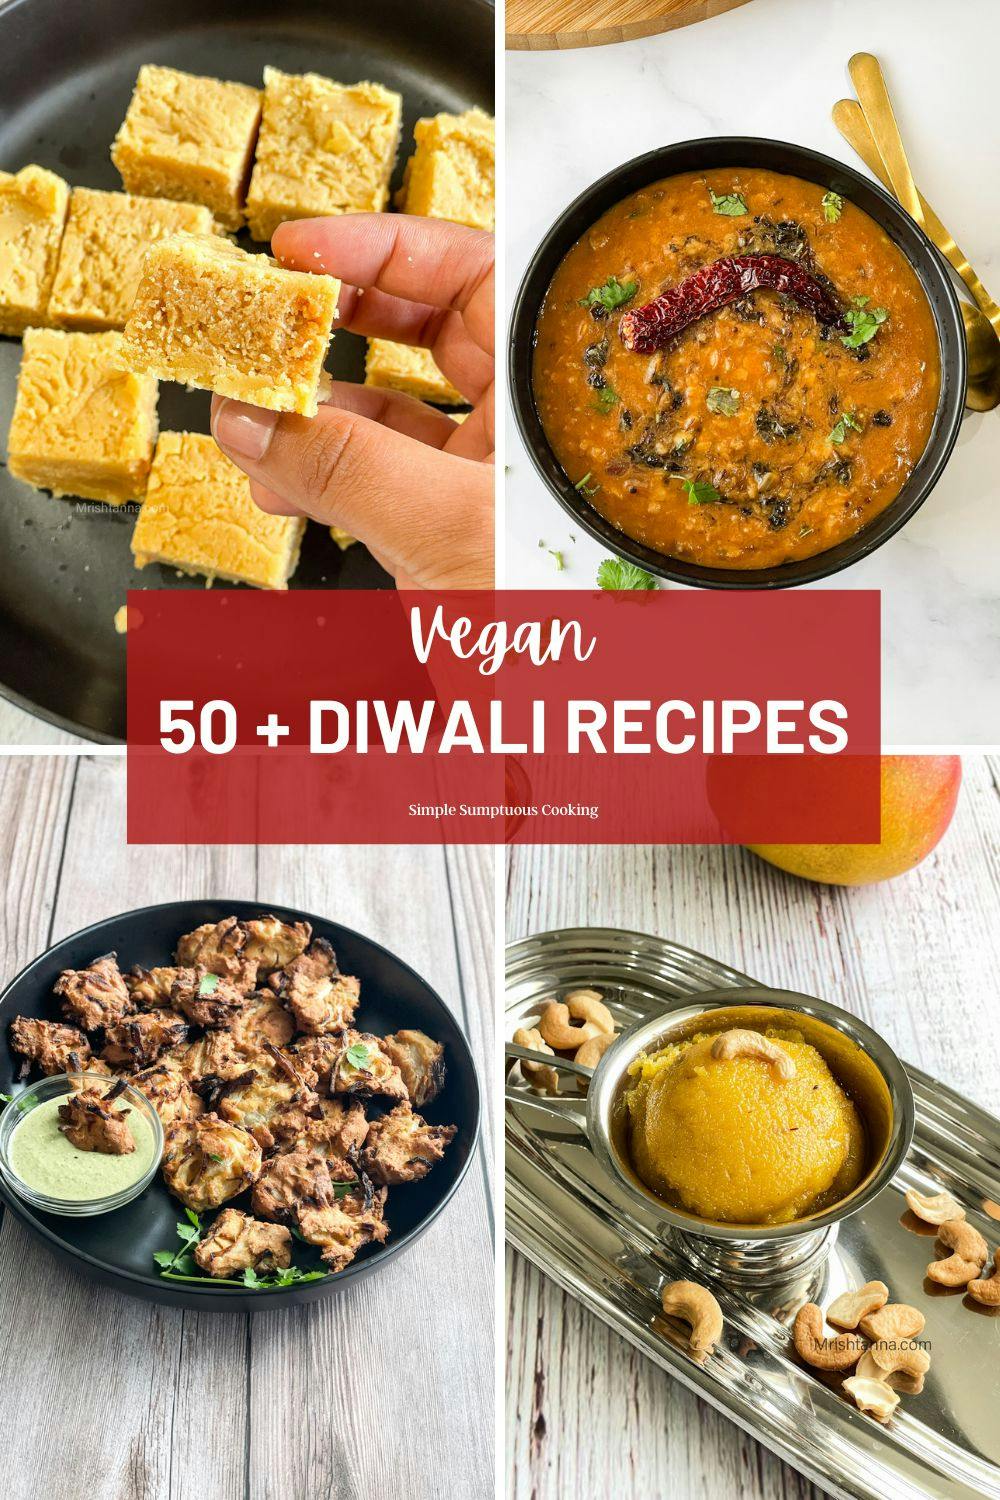 Collections of diwali recipes